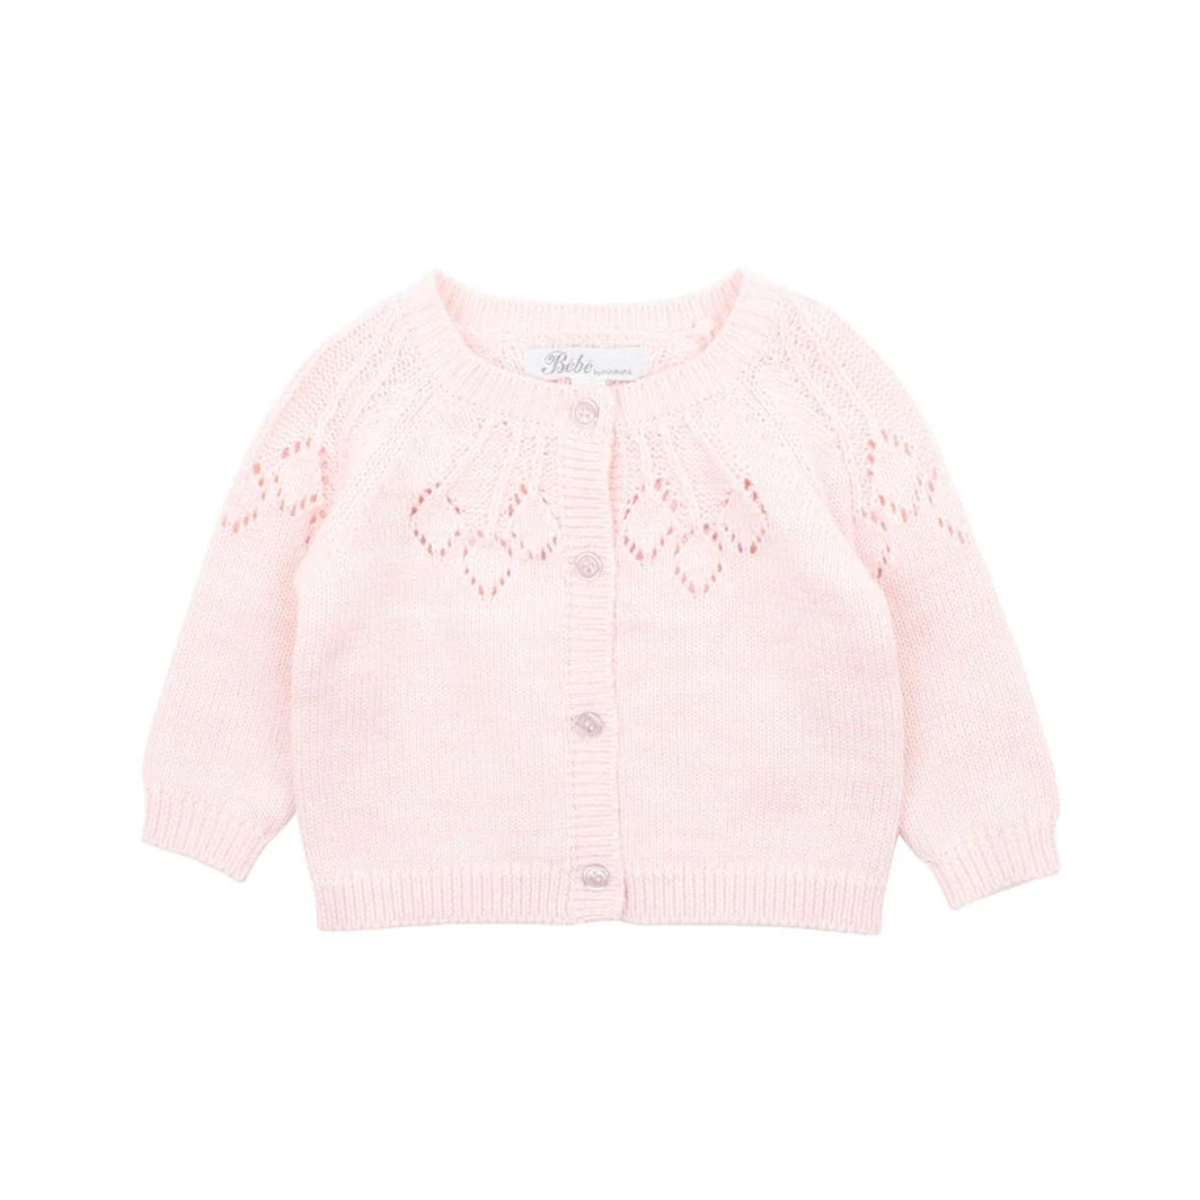 Ciara Needle Out Knitted Cardigan - Pink Marle